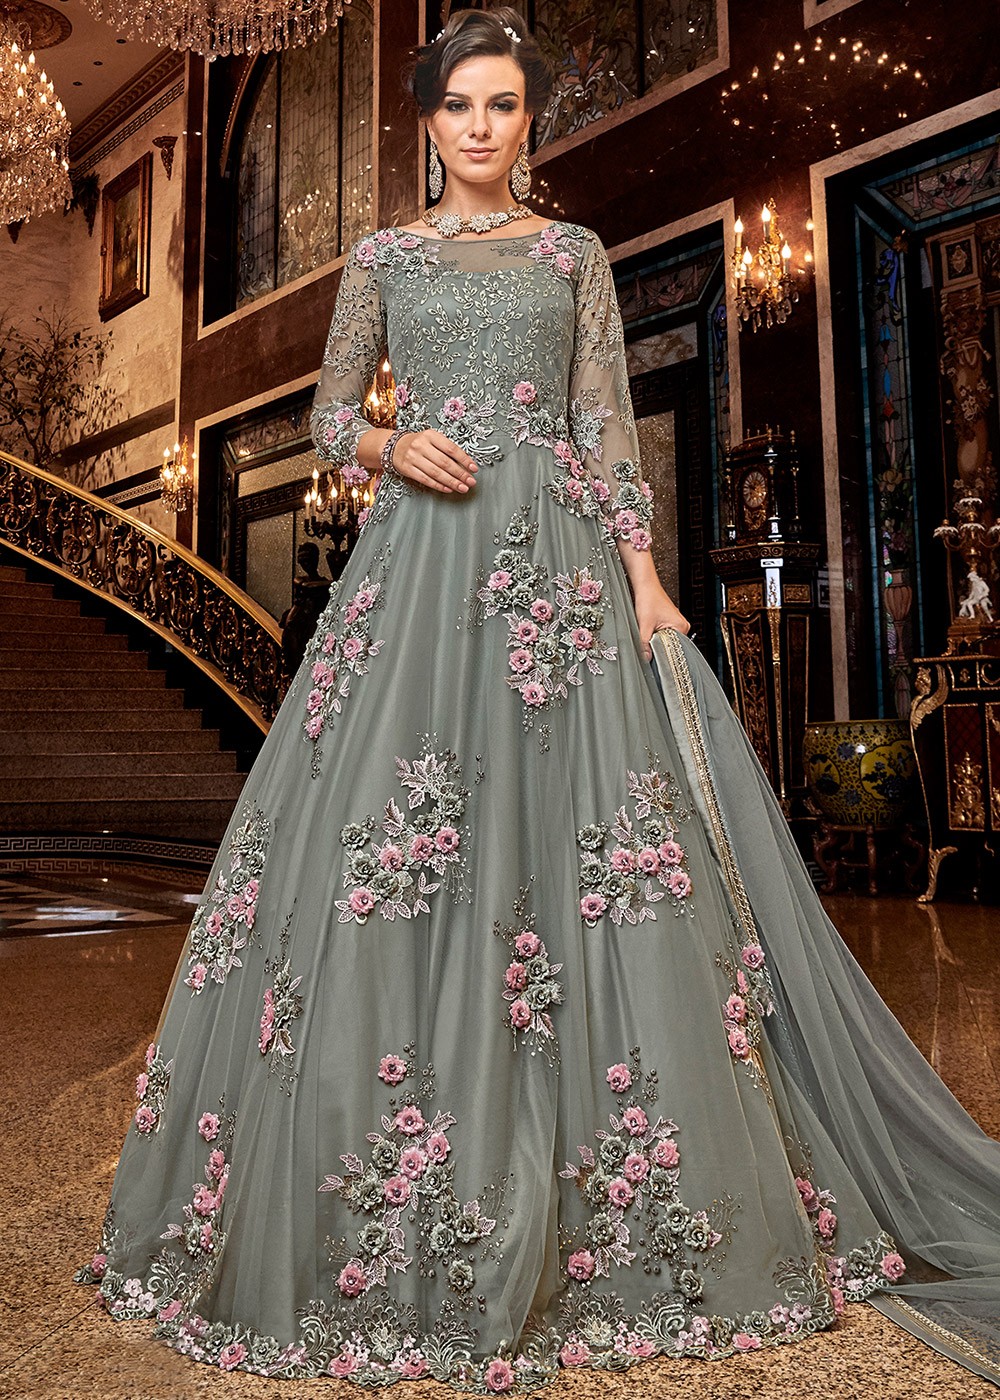 Anarkali Suits - Upto 70 % Off on Bollywood Anarrkali Online in India